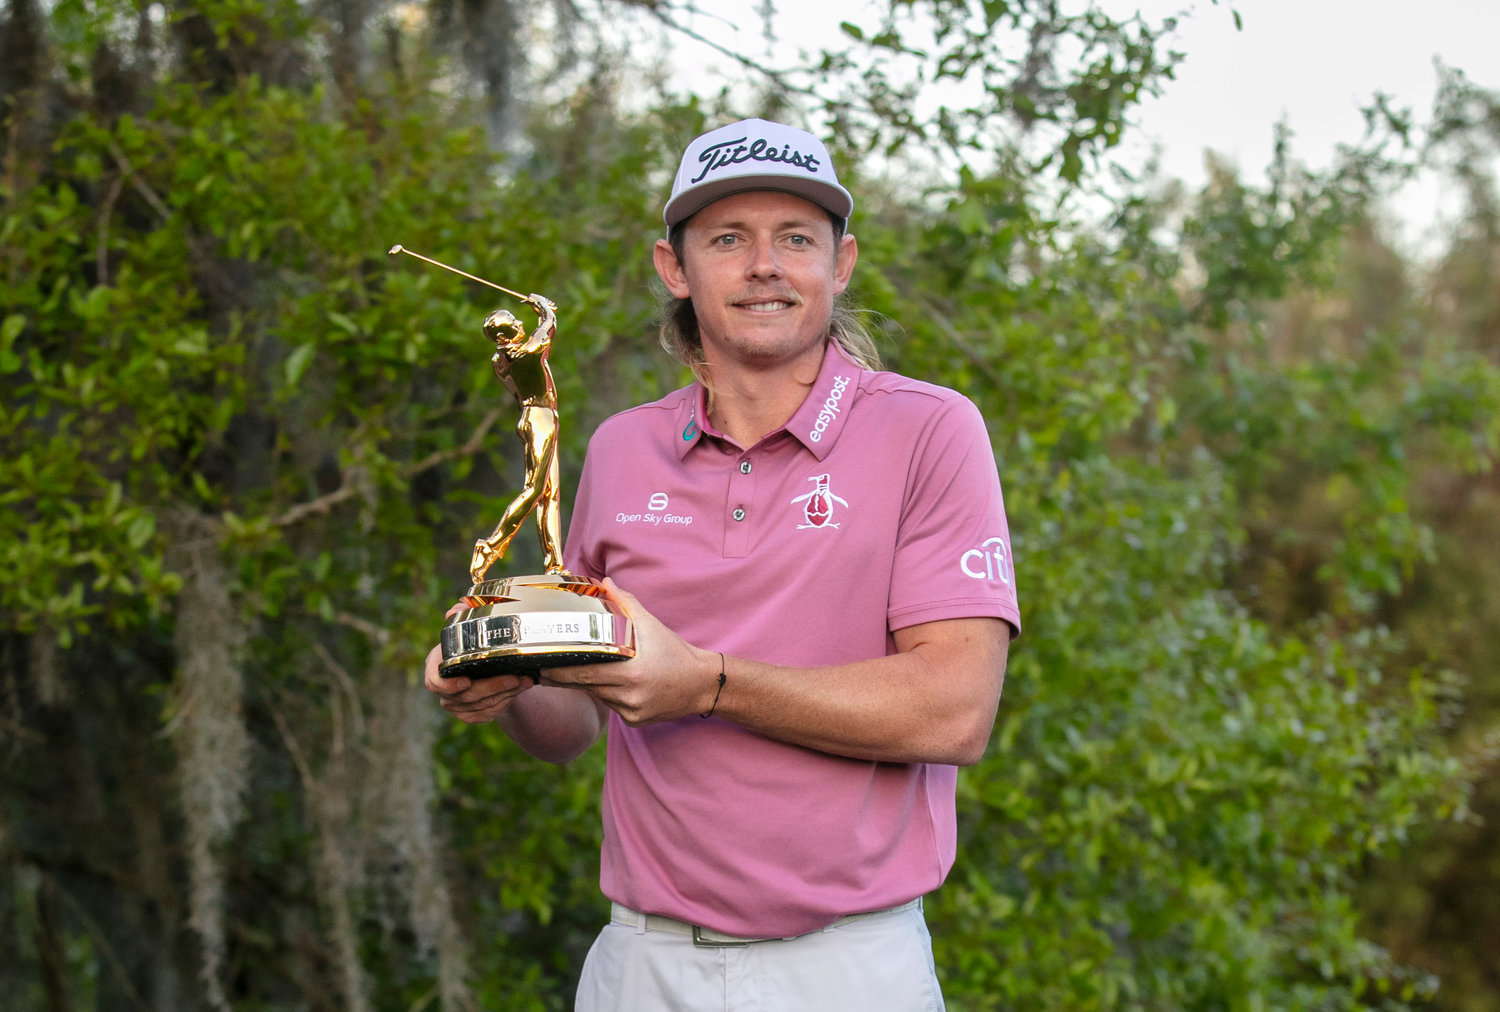 Cameron Smith prevailed over tough competition, fierce winds and multiple rain delays to win the 2022 PLAYERS Championship on Monday. A Jacksonville Beach resident, Smith becomes the fifth tournament winner to originally hail from Australia.